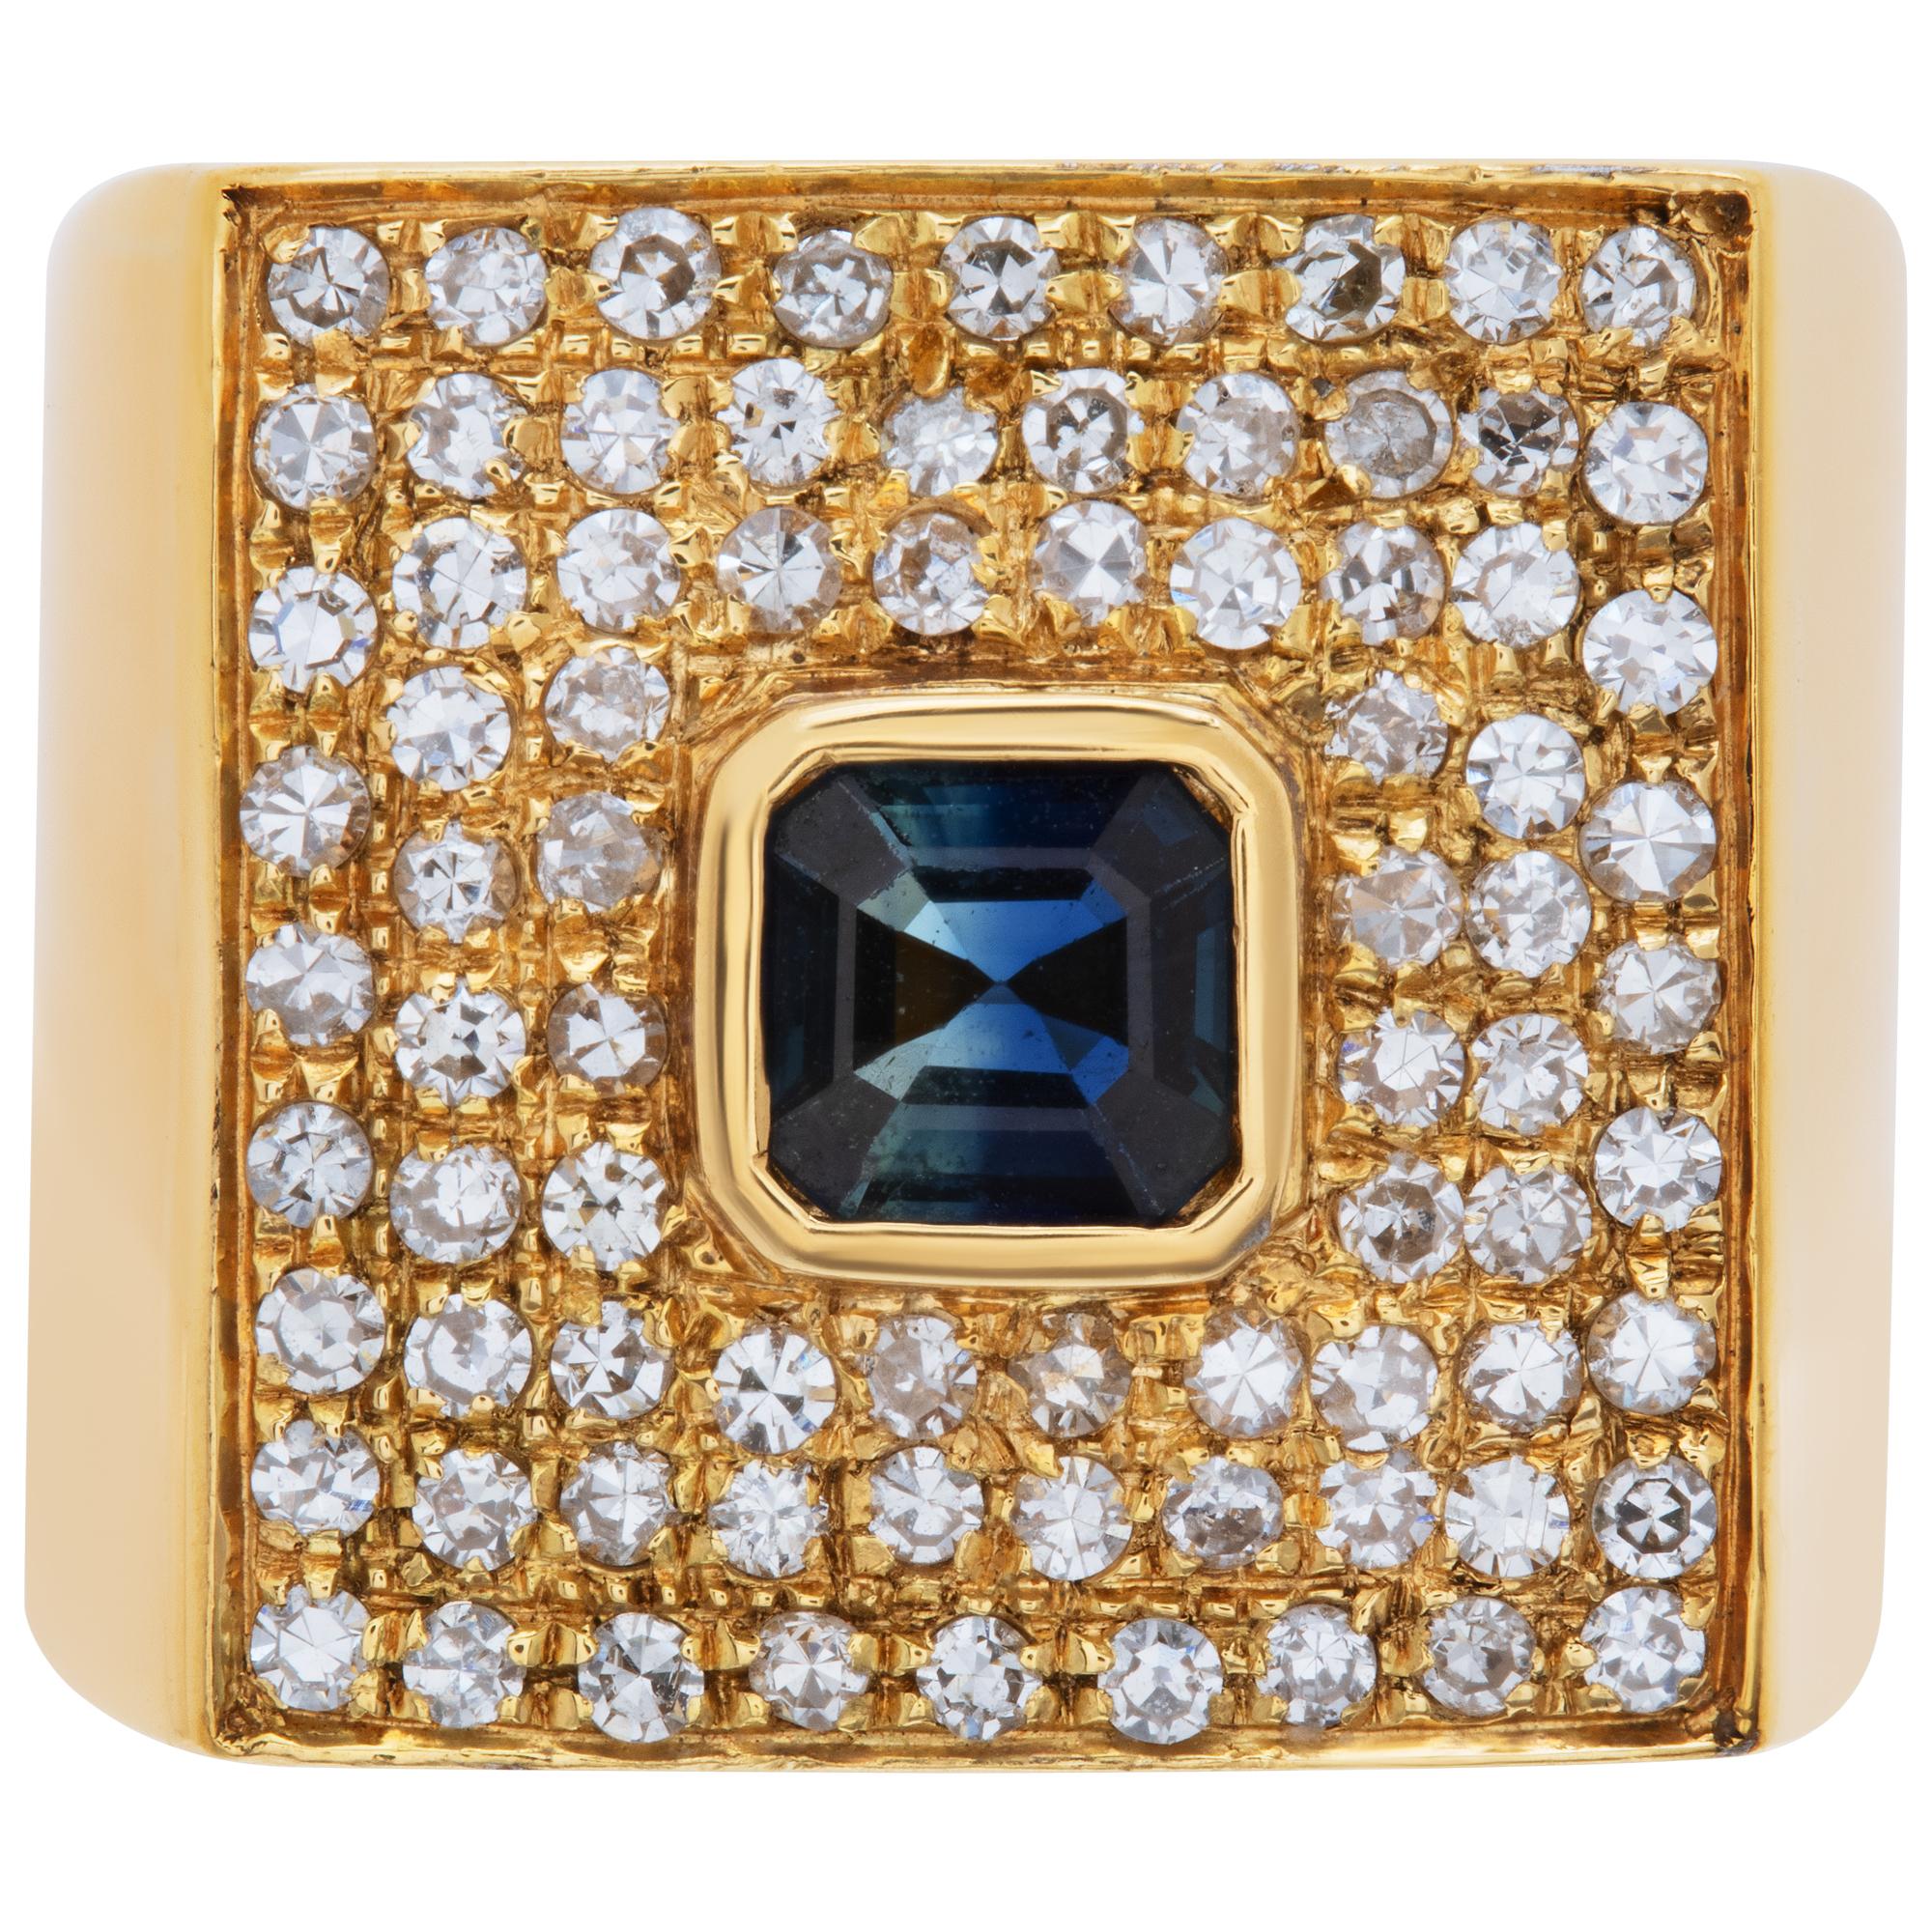 Stepped square emerald cut saphhire & diamonds ring. in 18K yellow gold. Round brilliant diamonds total approx. weight: 1.0 carat, estimate H-I color, VS-SI clarity. Center sapphire approx. weight: 1.0 carat. Square front 15 x15mm. Size 4.5This